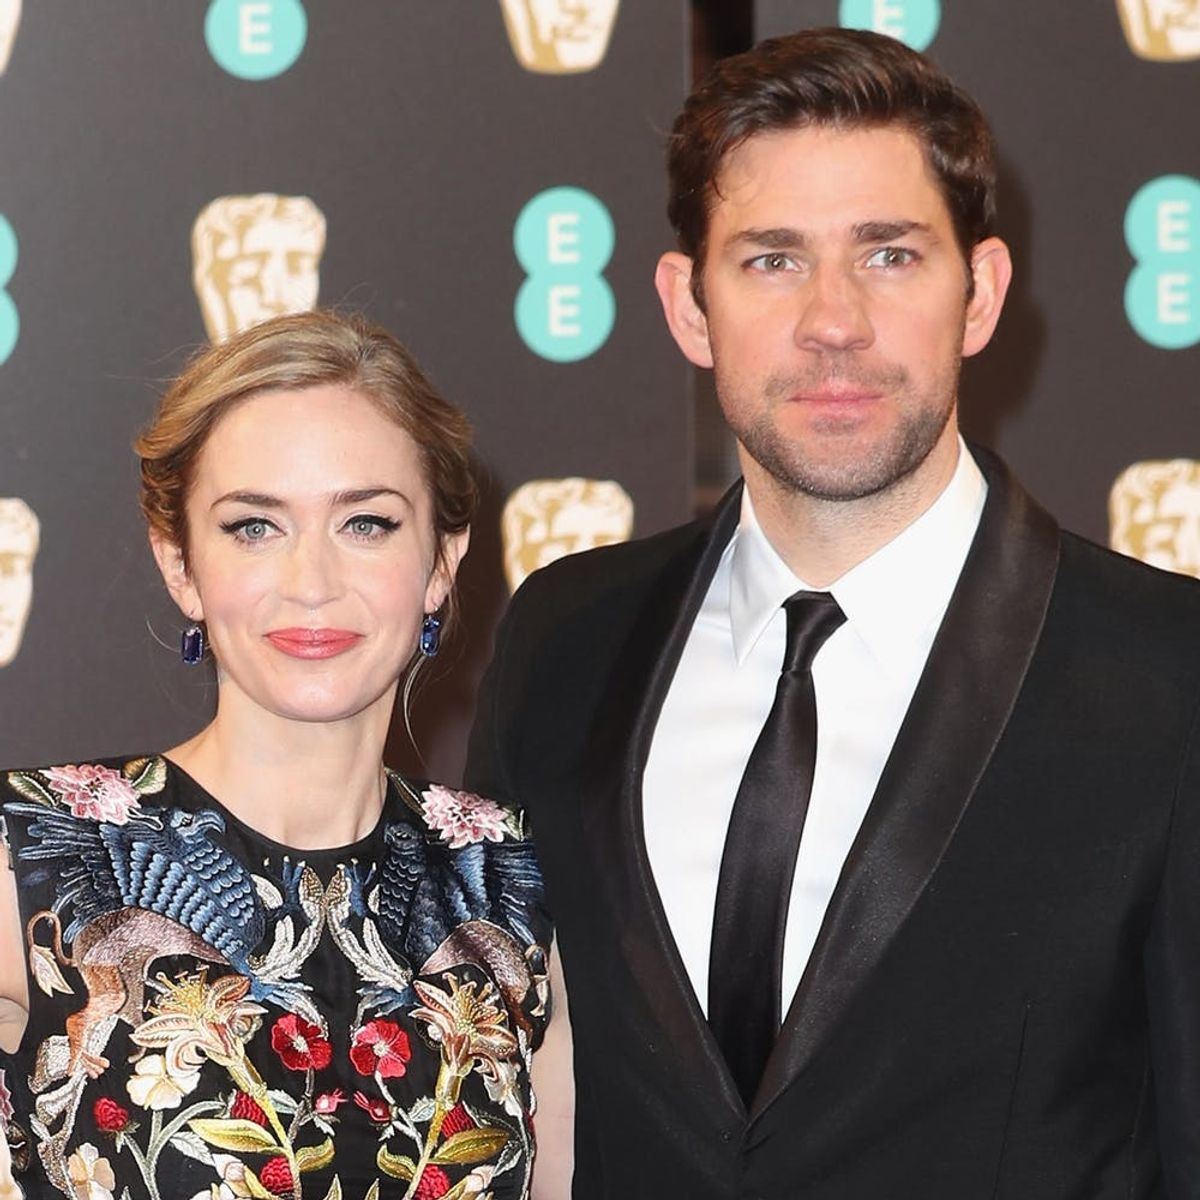 The Trailer for John Krasinski and Emily Blunt’s First Movie Together Is Seriously Chilling